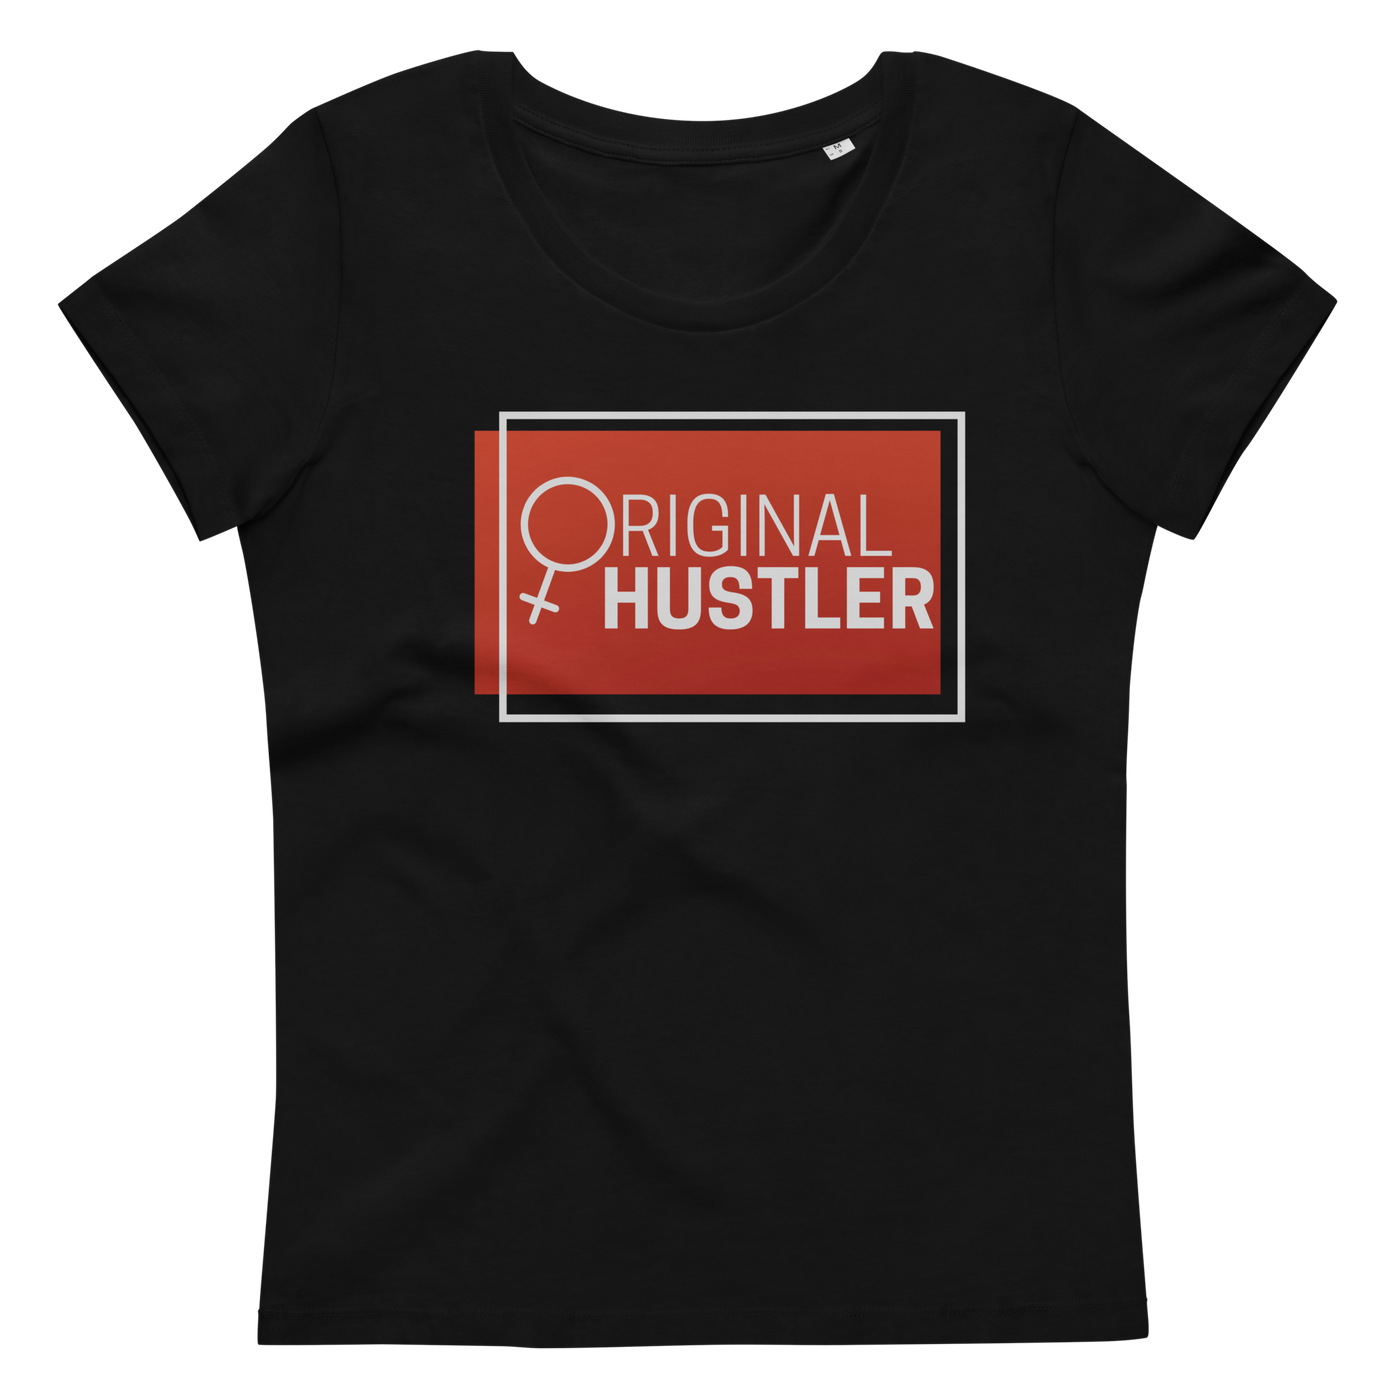 Get trendy with Women's fitted eco tee - Original Hustler -  available at SWCH Store. Grab yours for £22.50 today!